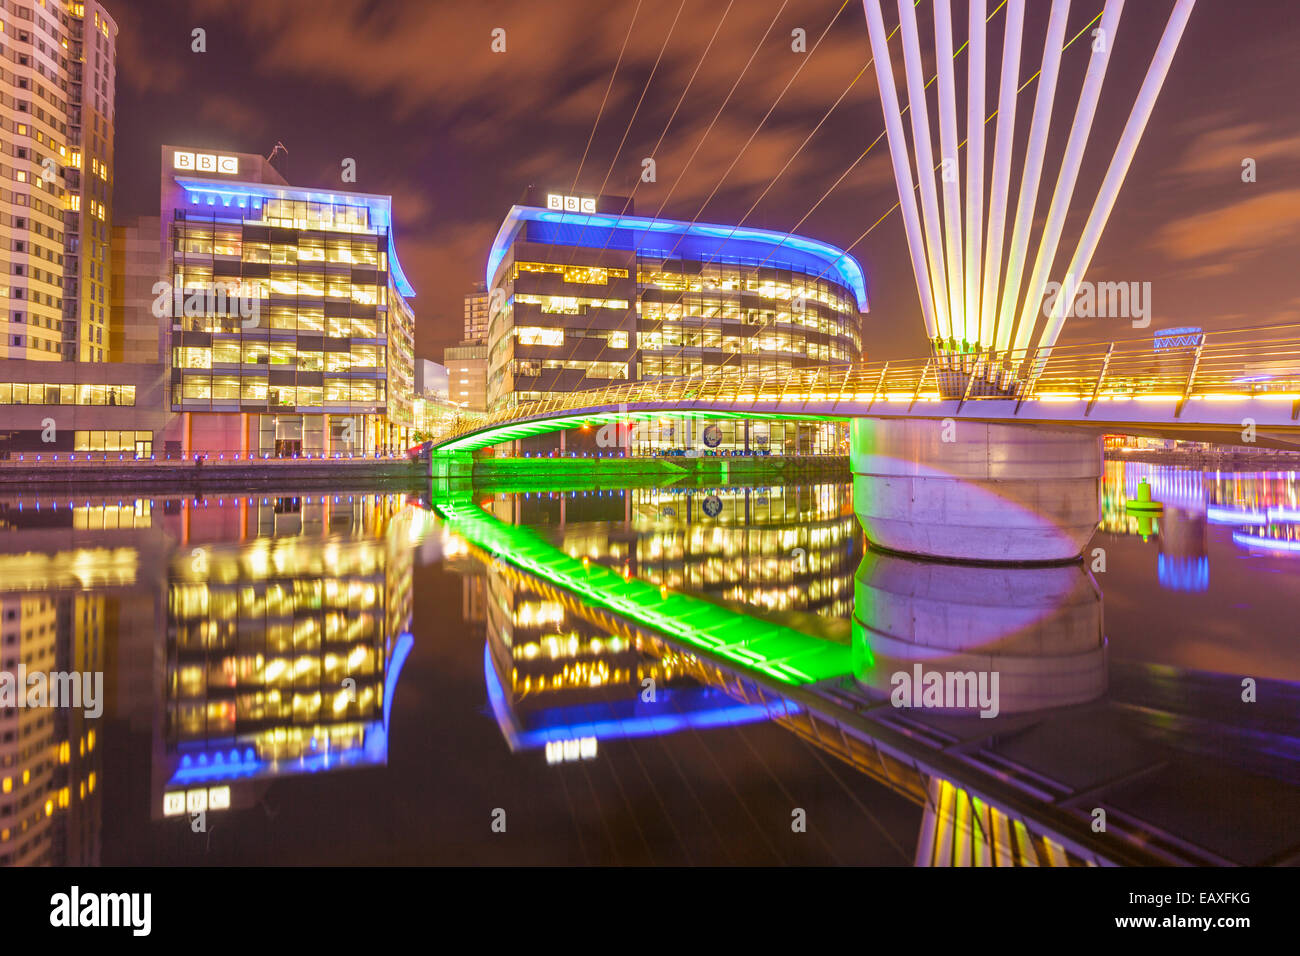 Salford Media City UK Salford Quays skyline di manchester Greater Manchester Inghilterra UK GB Europa Foto Stock